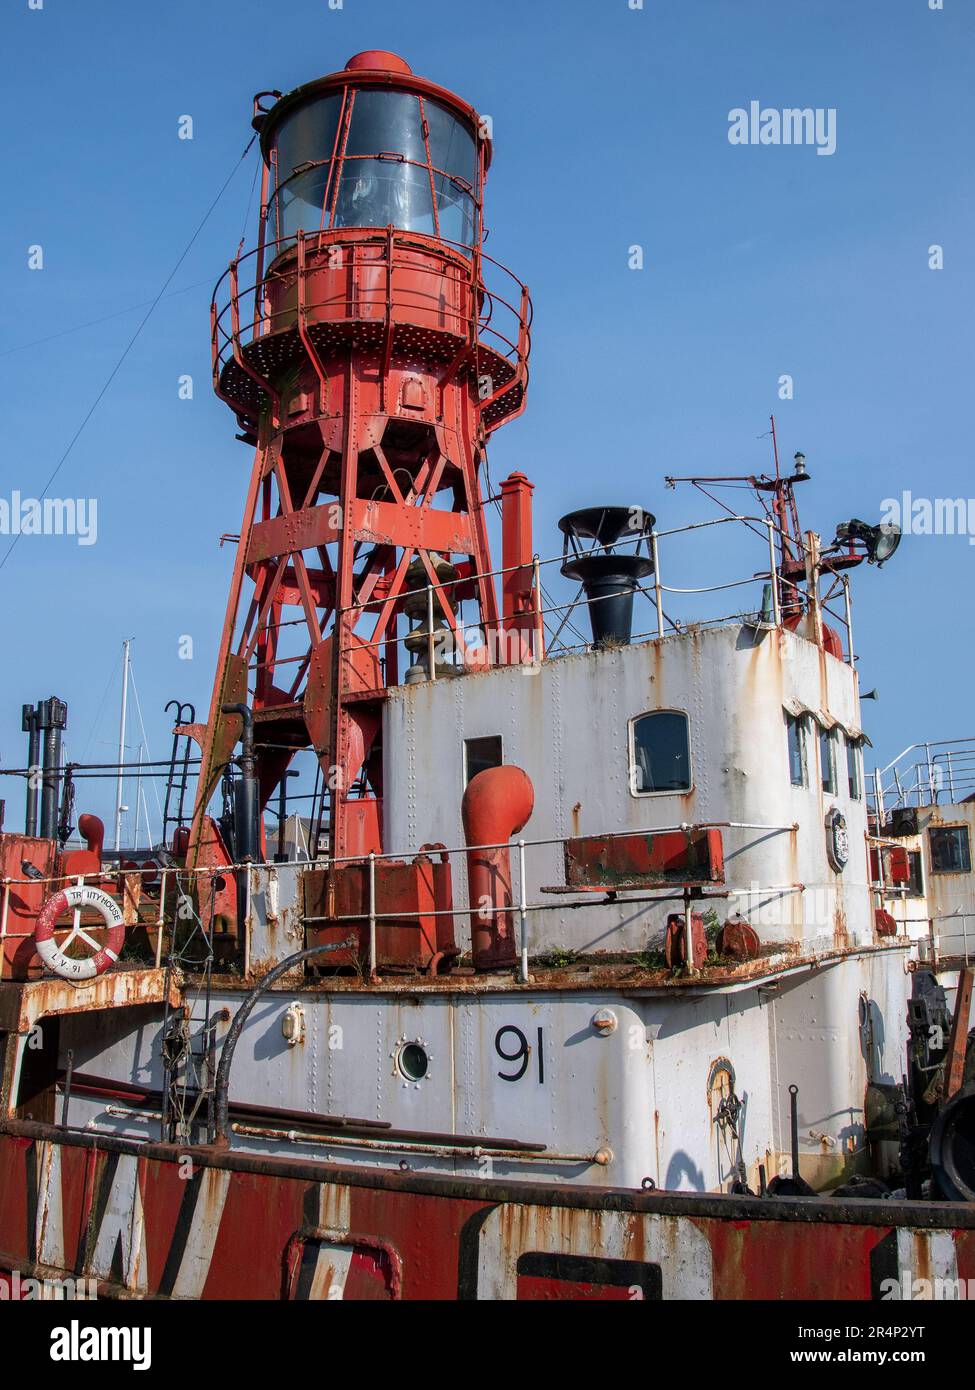 Swansea, Wales, UK. May 22nd, 2023: Close-up of the Helwick (Lightship 91) in the Swansea docks. Stock Photo